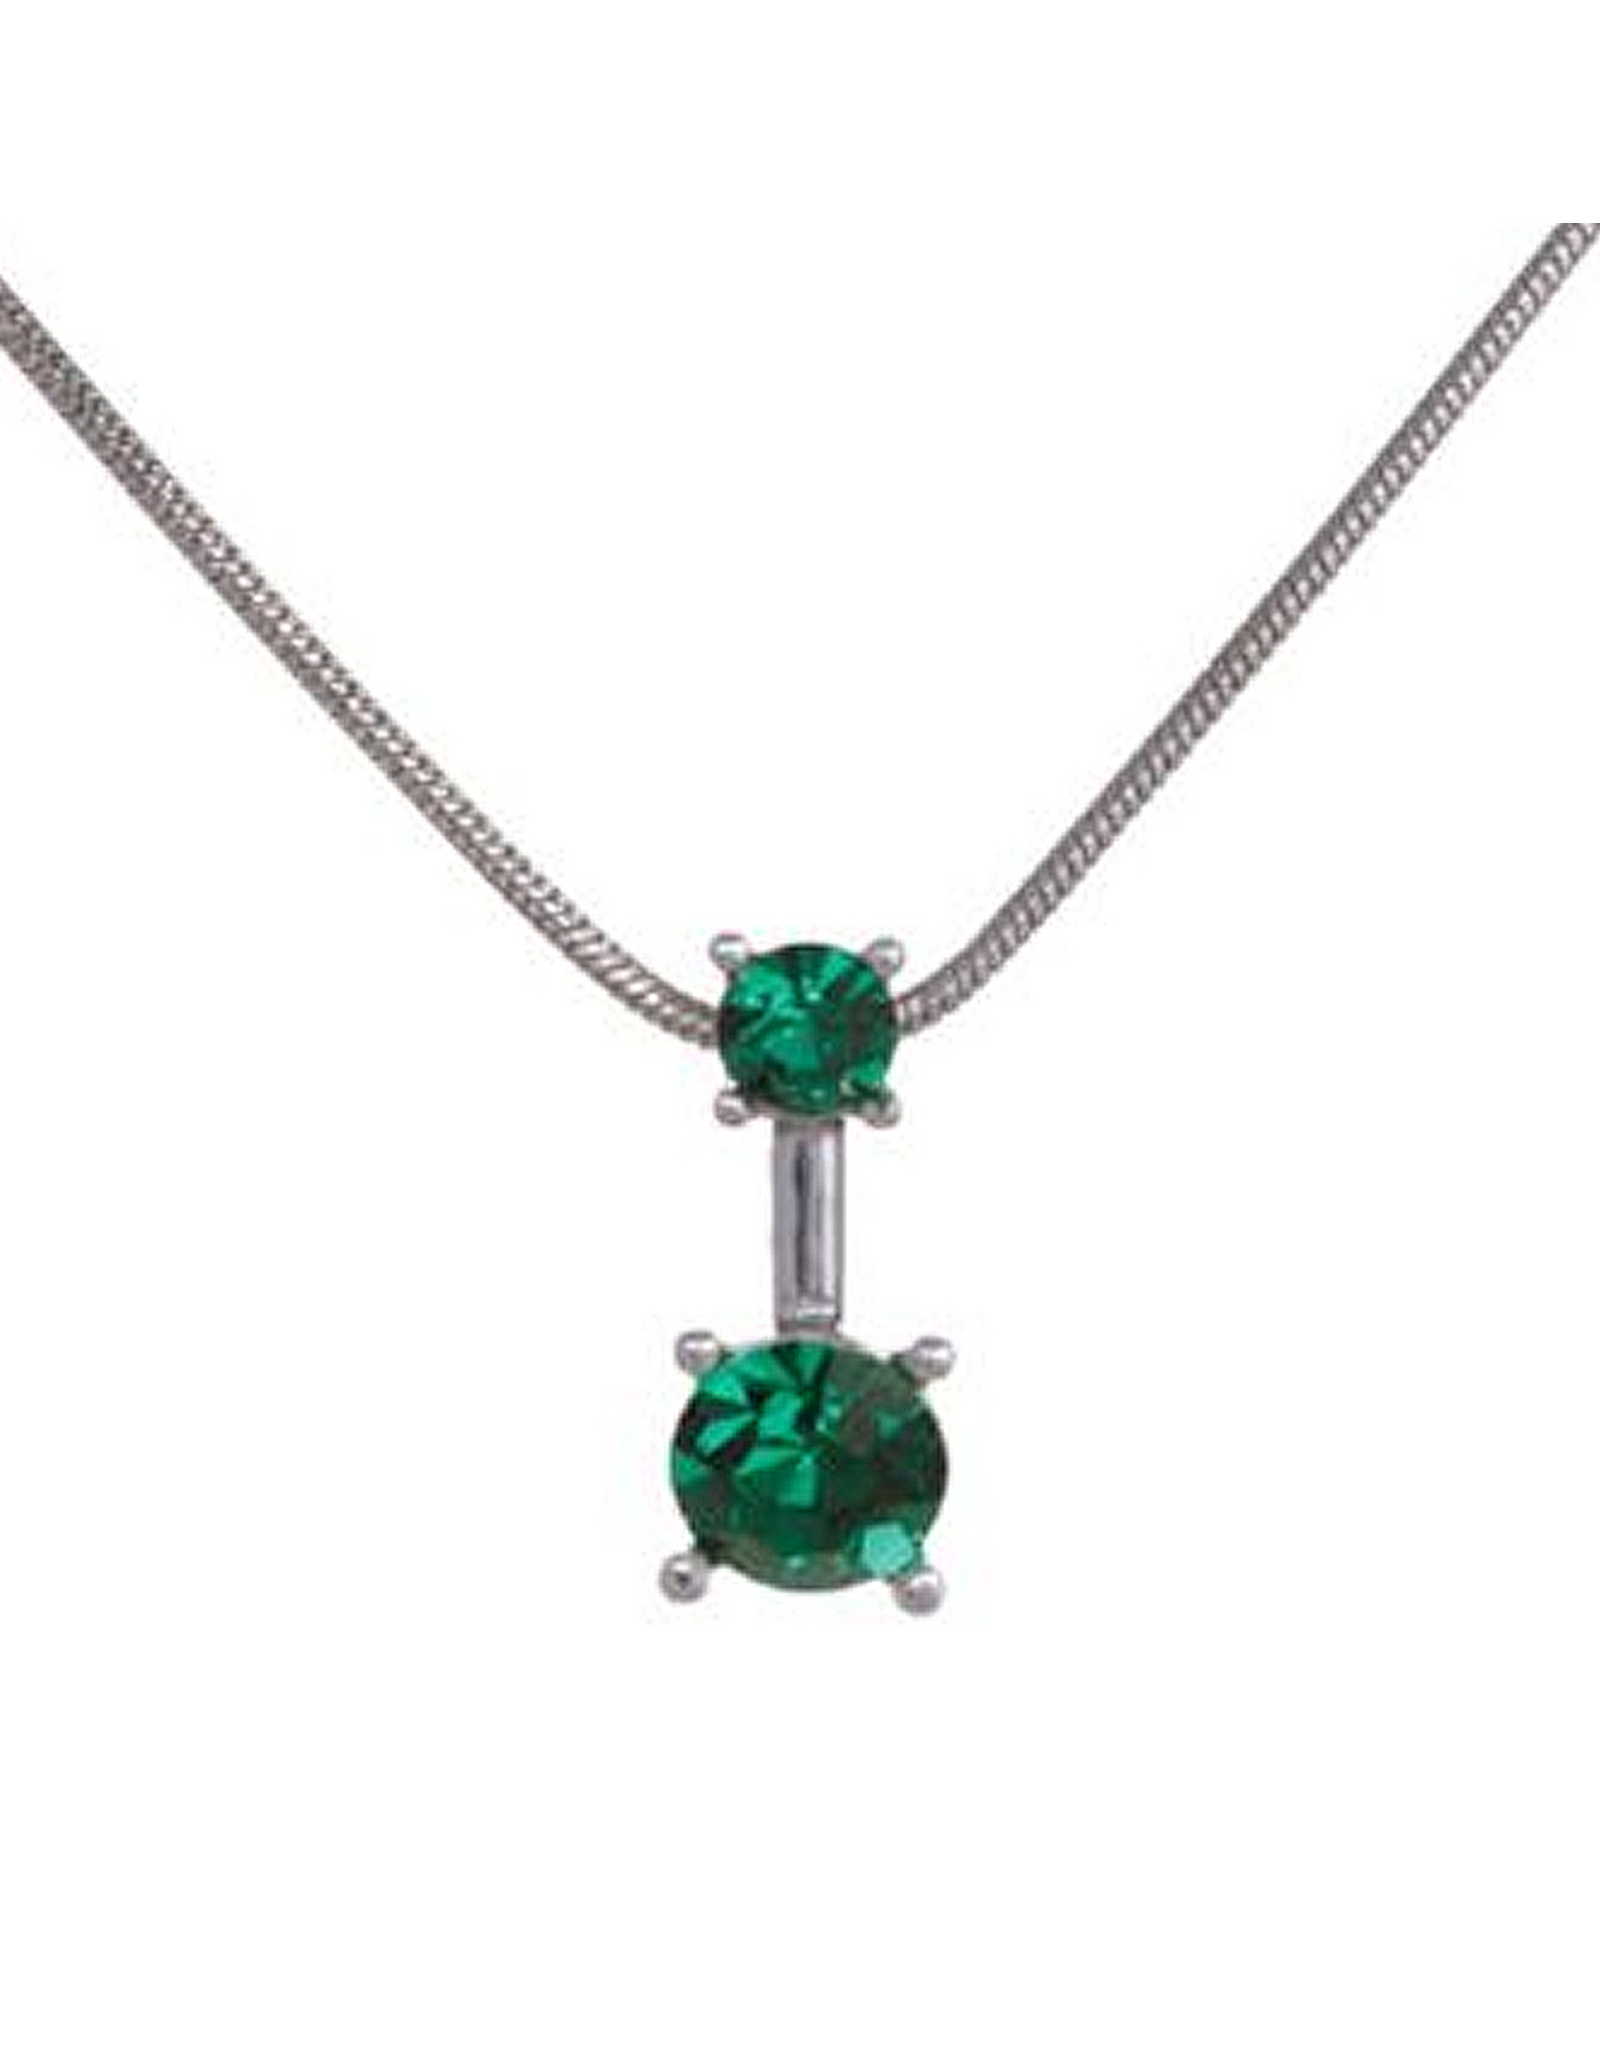 Annaleece Necklace Sweet Emerald Rhodium Pendant with Crystals